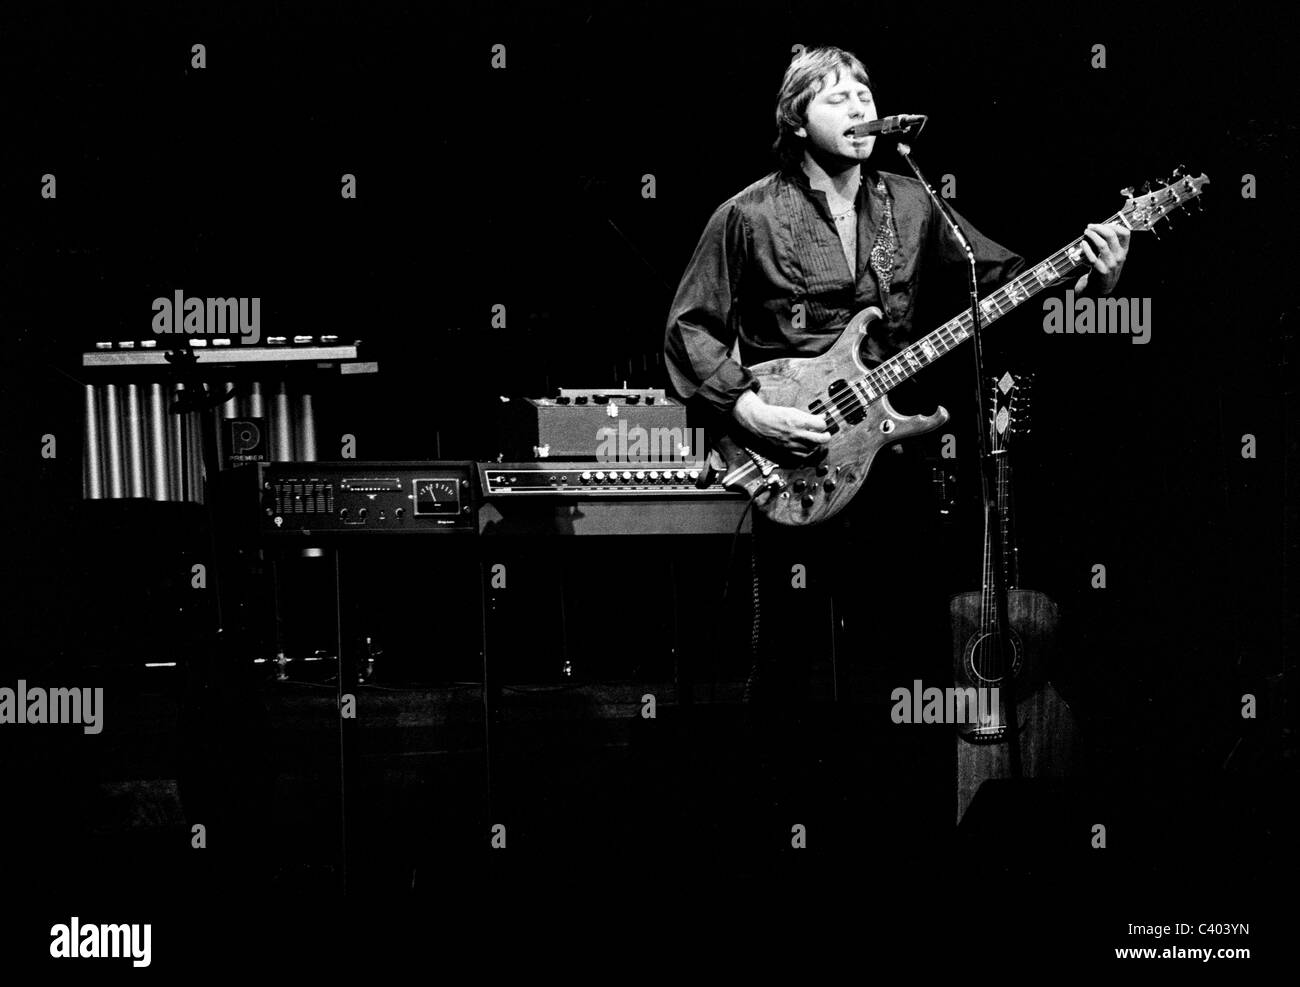 Greg Lake of the band Emerson Lake and Palmer in Concert. Stock Photo